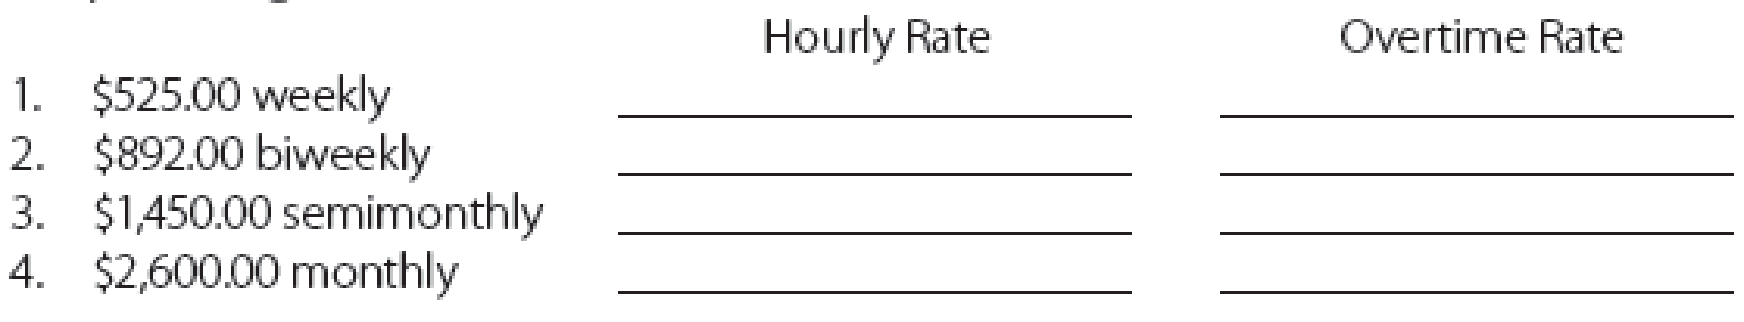 Chapter 2, Problem 3SSQ, Compute the hourly and overtime rates for a standard 40-hour workweek for the following amounts: 